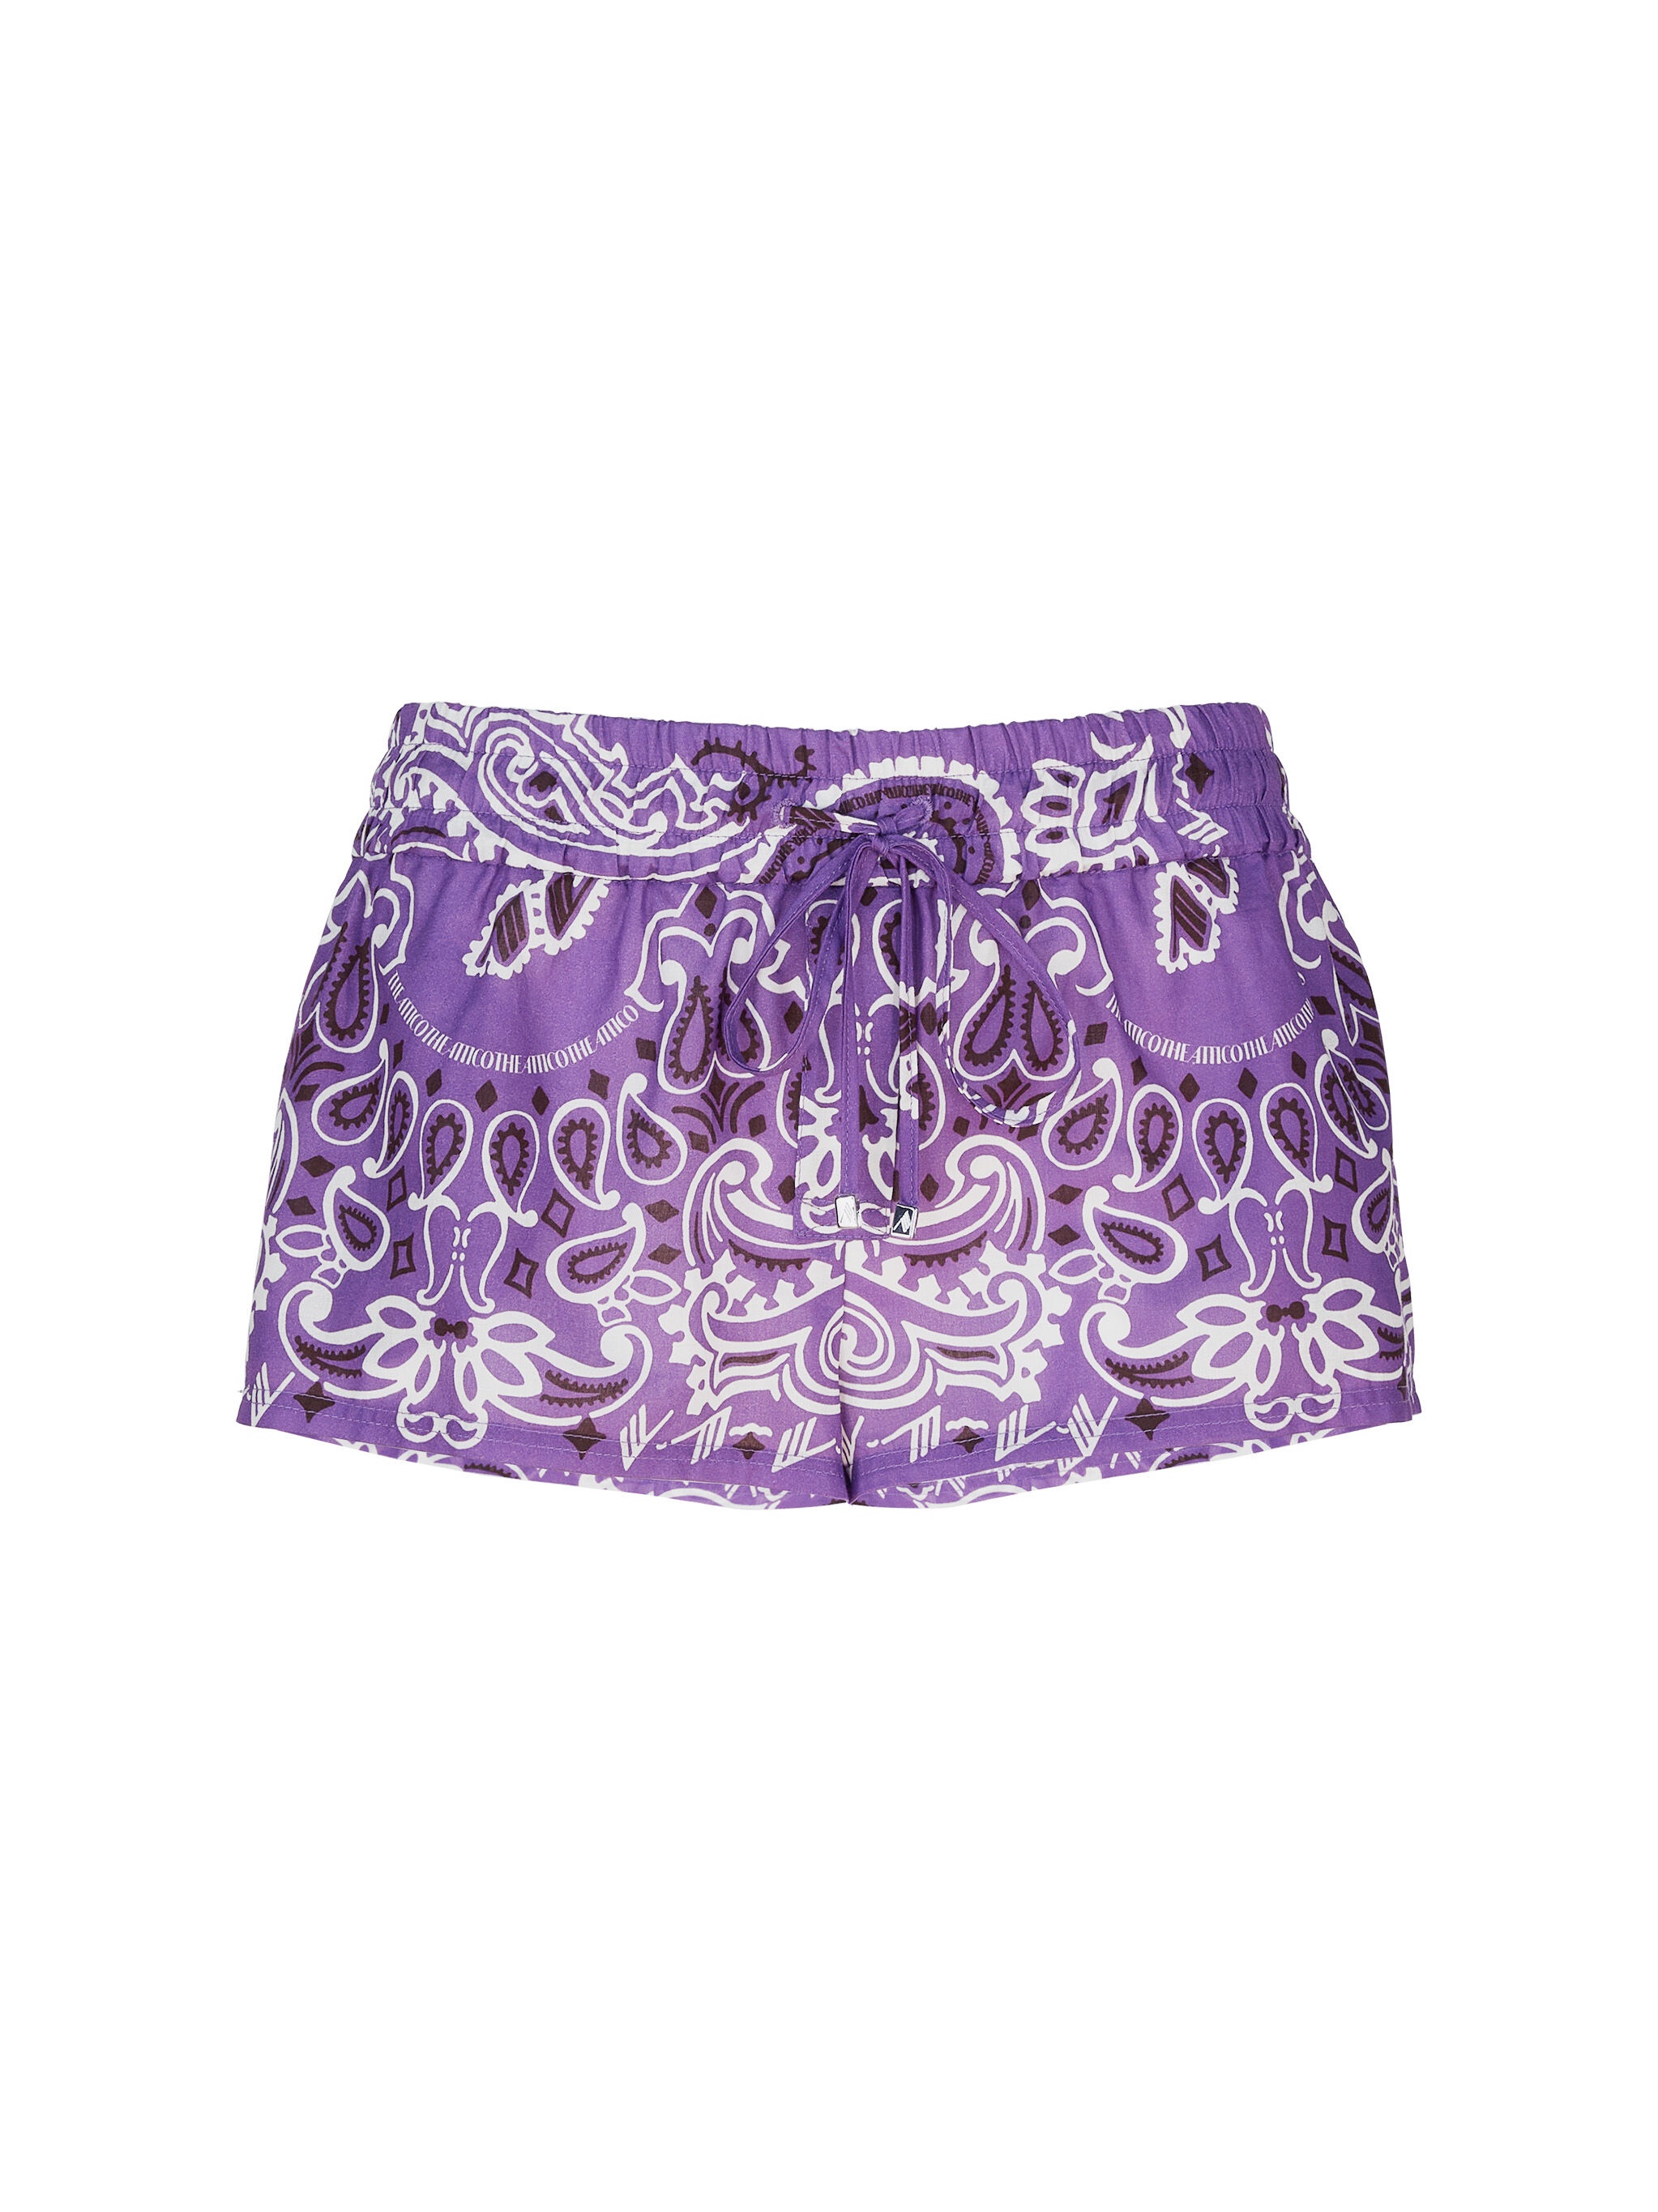 VIOLET, BROWN AND WHITE SHORT PANTS - 1